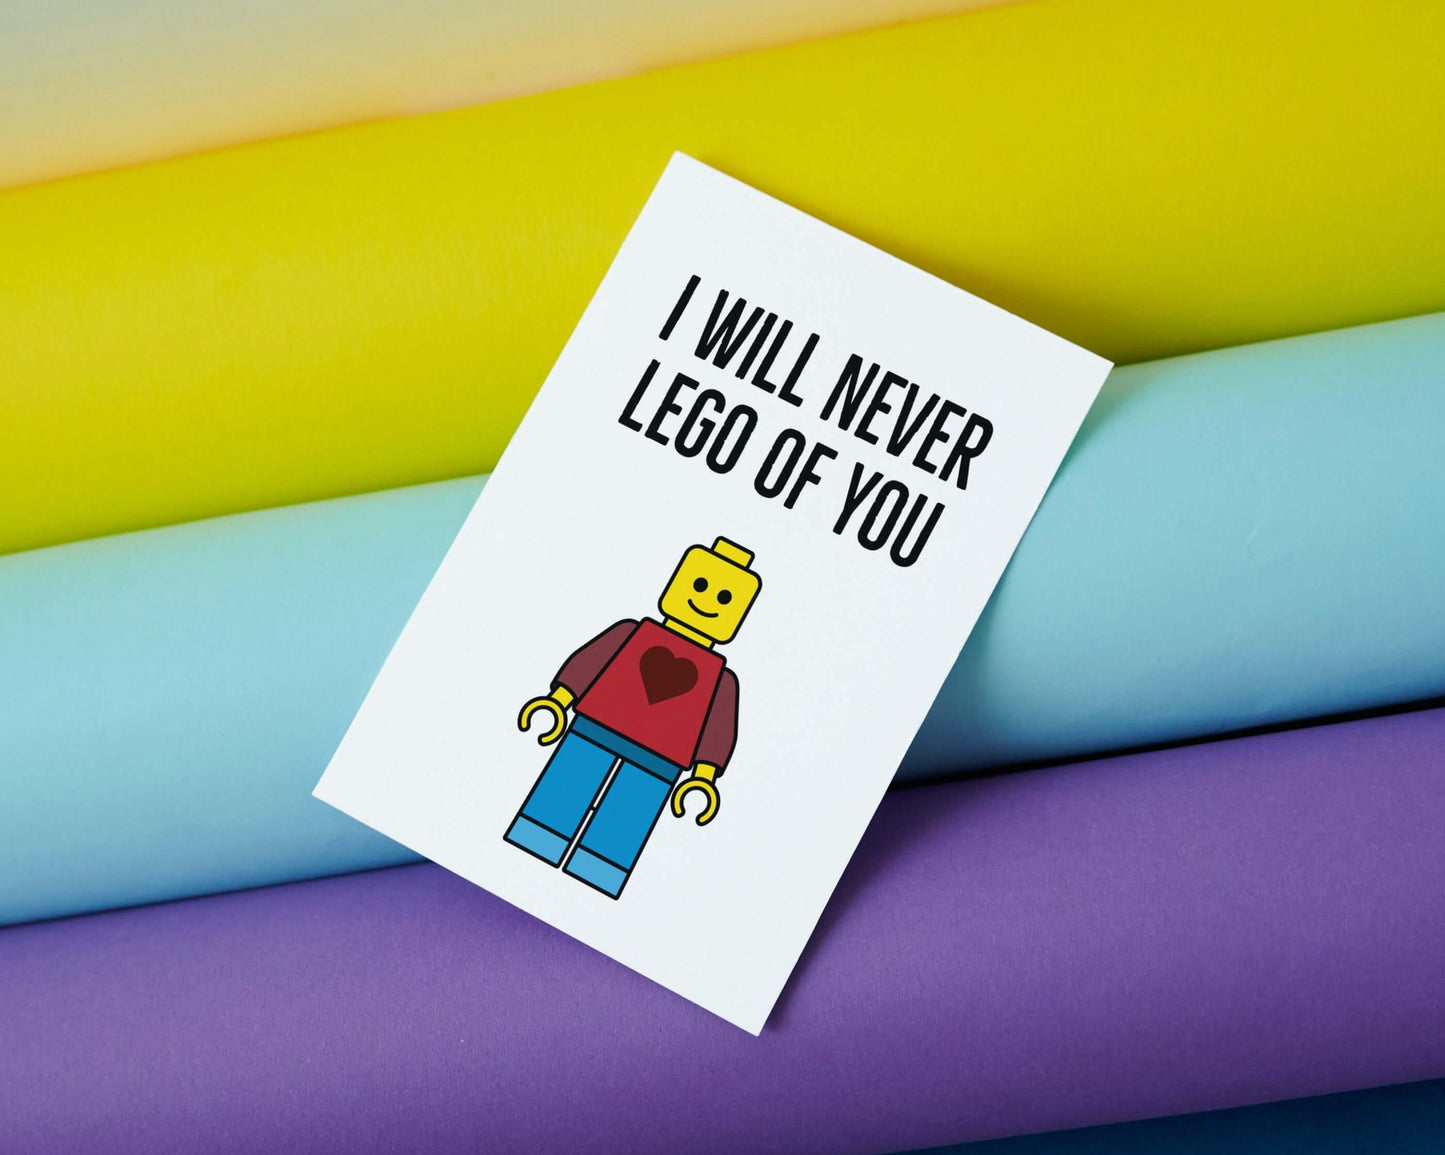 The Card Store UK's I Will Never Lego of You | Funny Lego Love Greeting Card, General Cards for £3.50 each